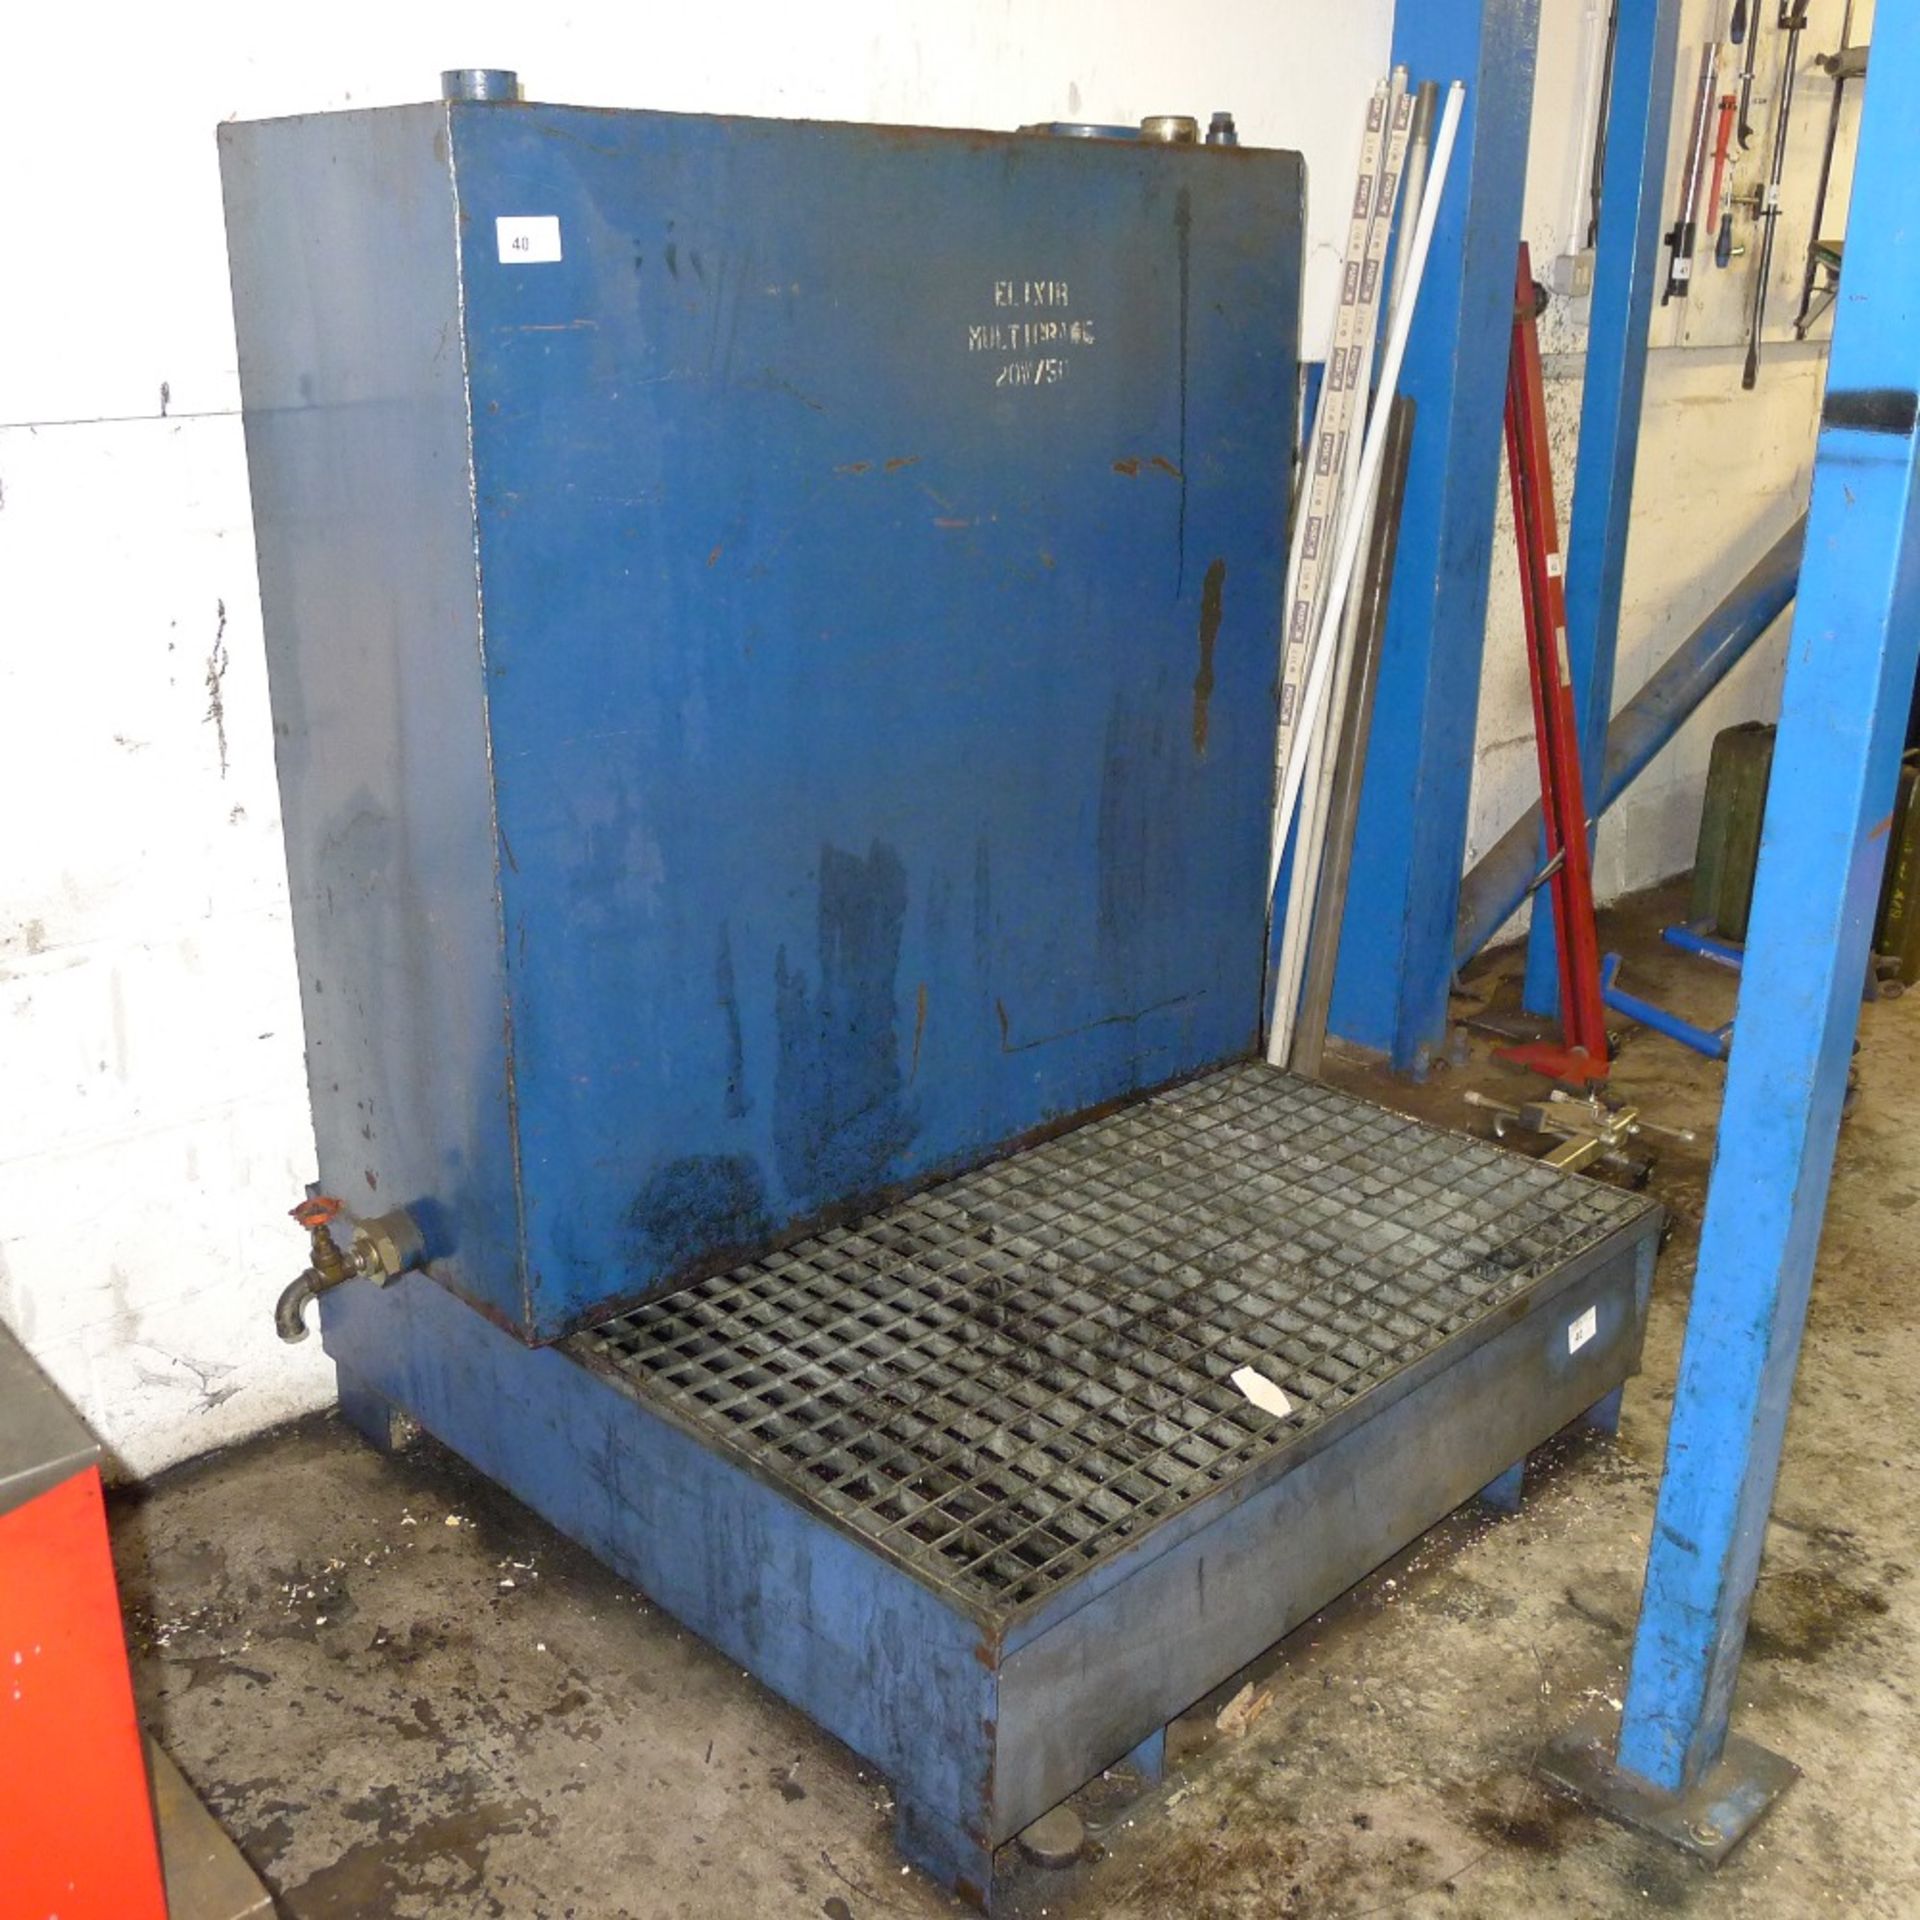 1 oil tank with grated stand – previously used for waste oil and currently empty